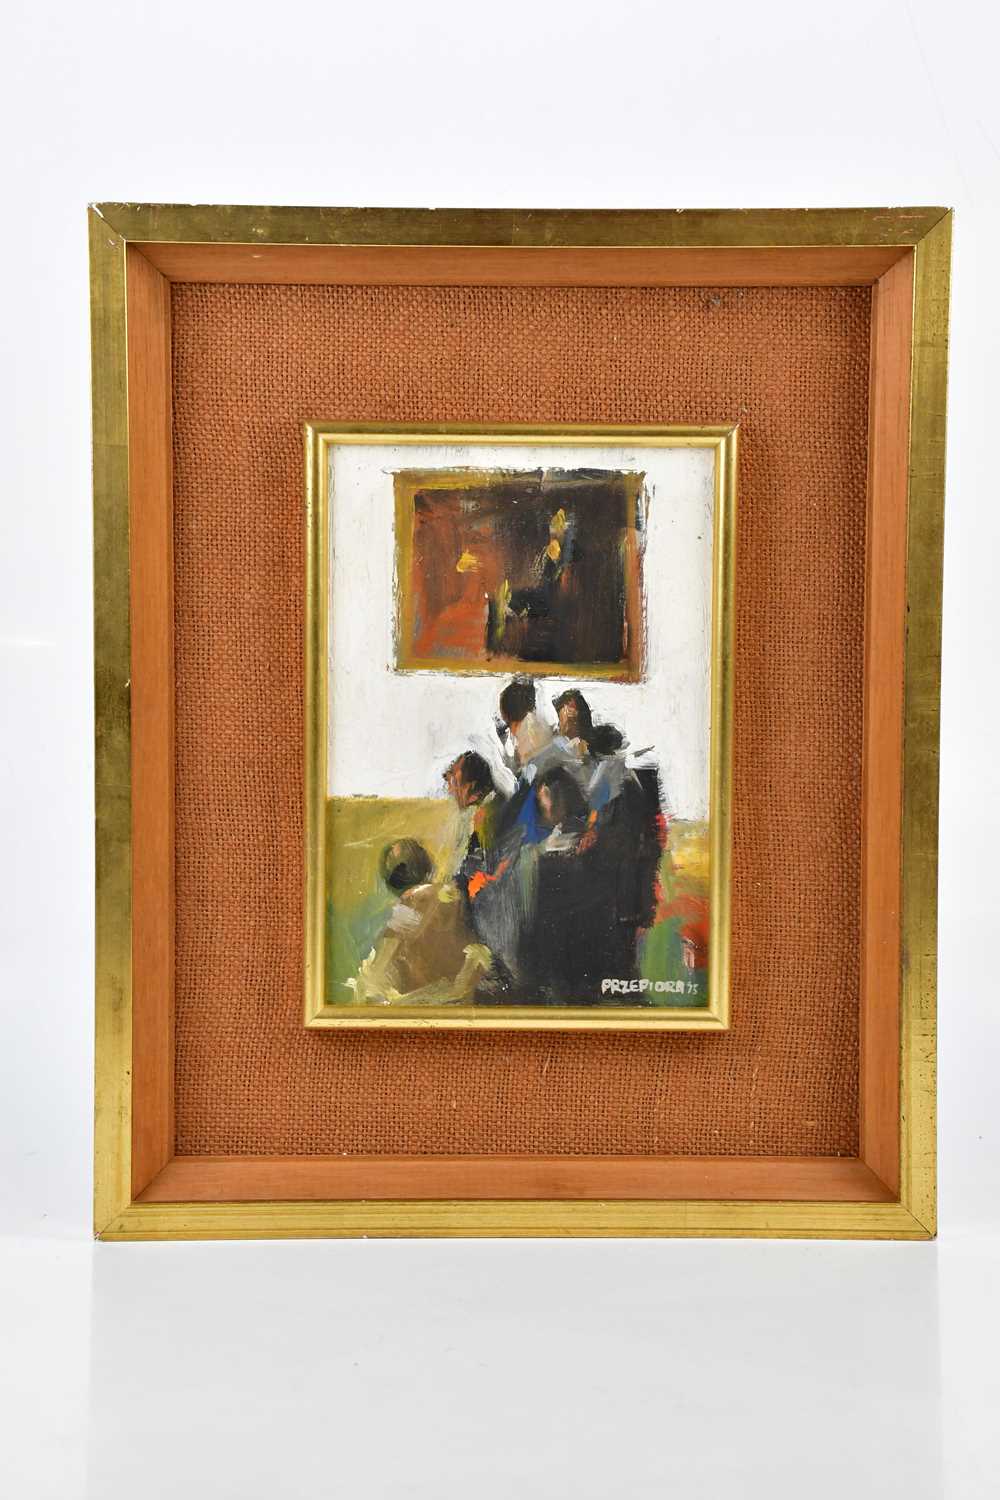 † PRZEPIORA; oil on board, figures in foreground, signed lower right, 25 x 17cm, framed.